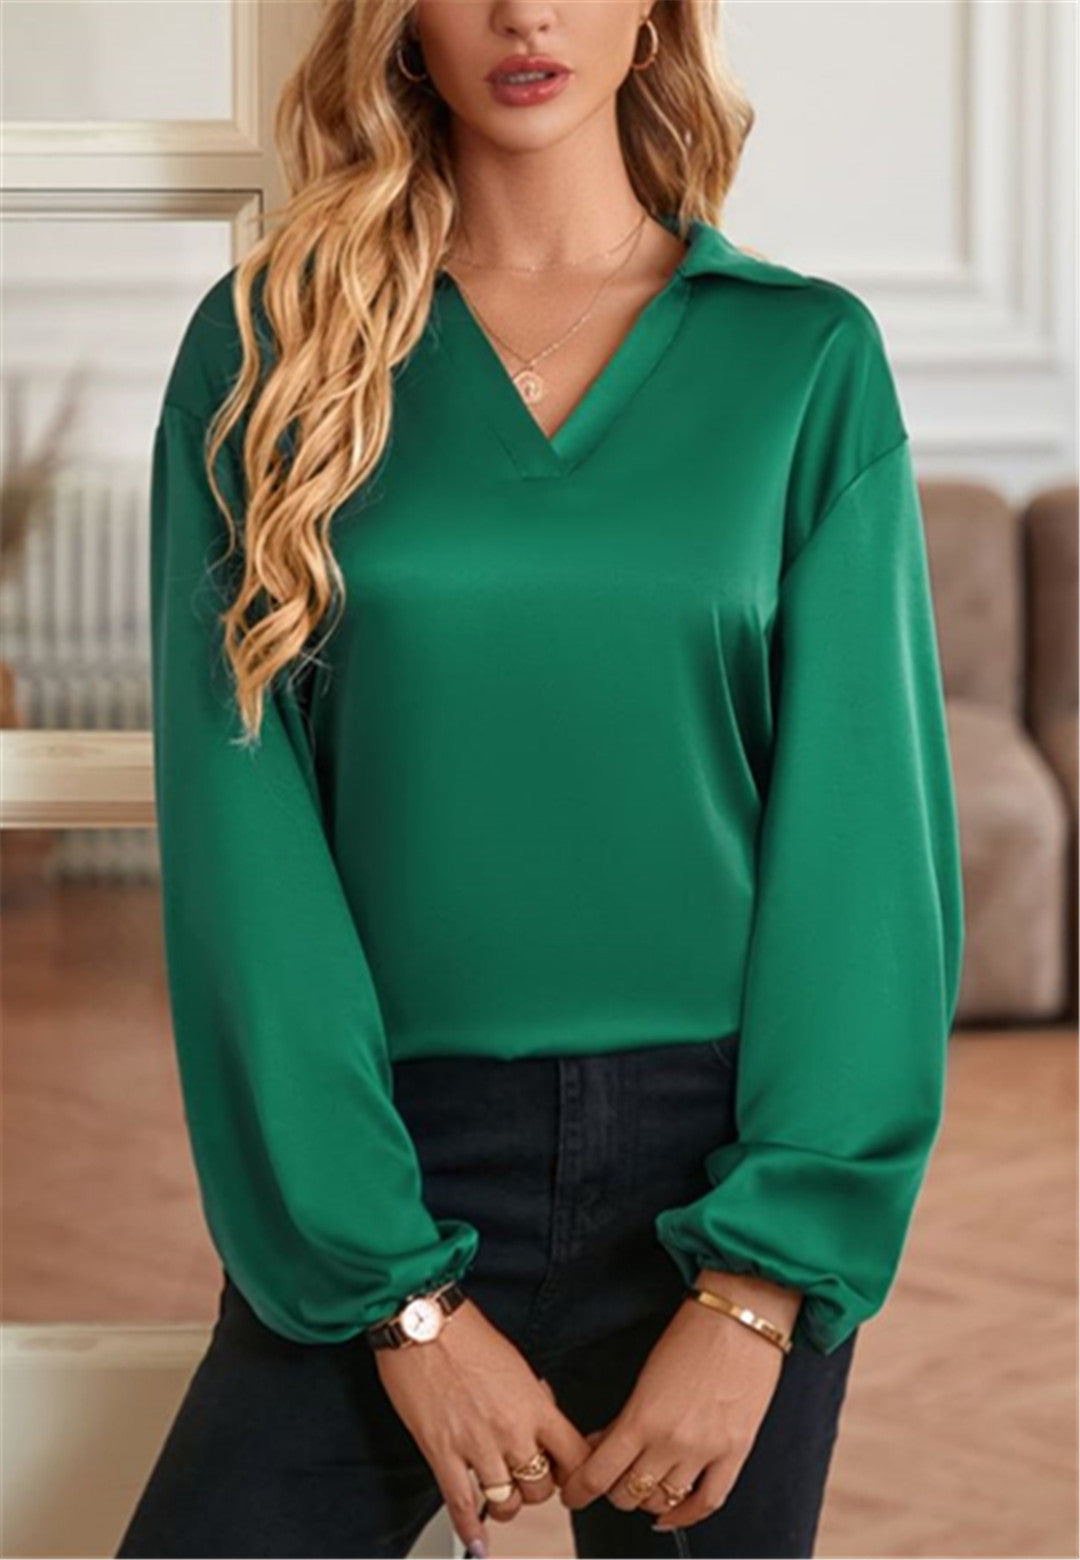 Long Sleeve Solid Silky Collar Blouse with Bowknot Open Back Elegant Tops - Chuzko Women Clothing